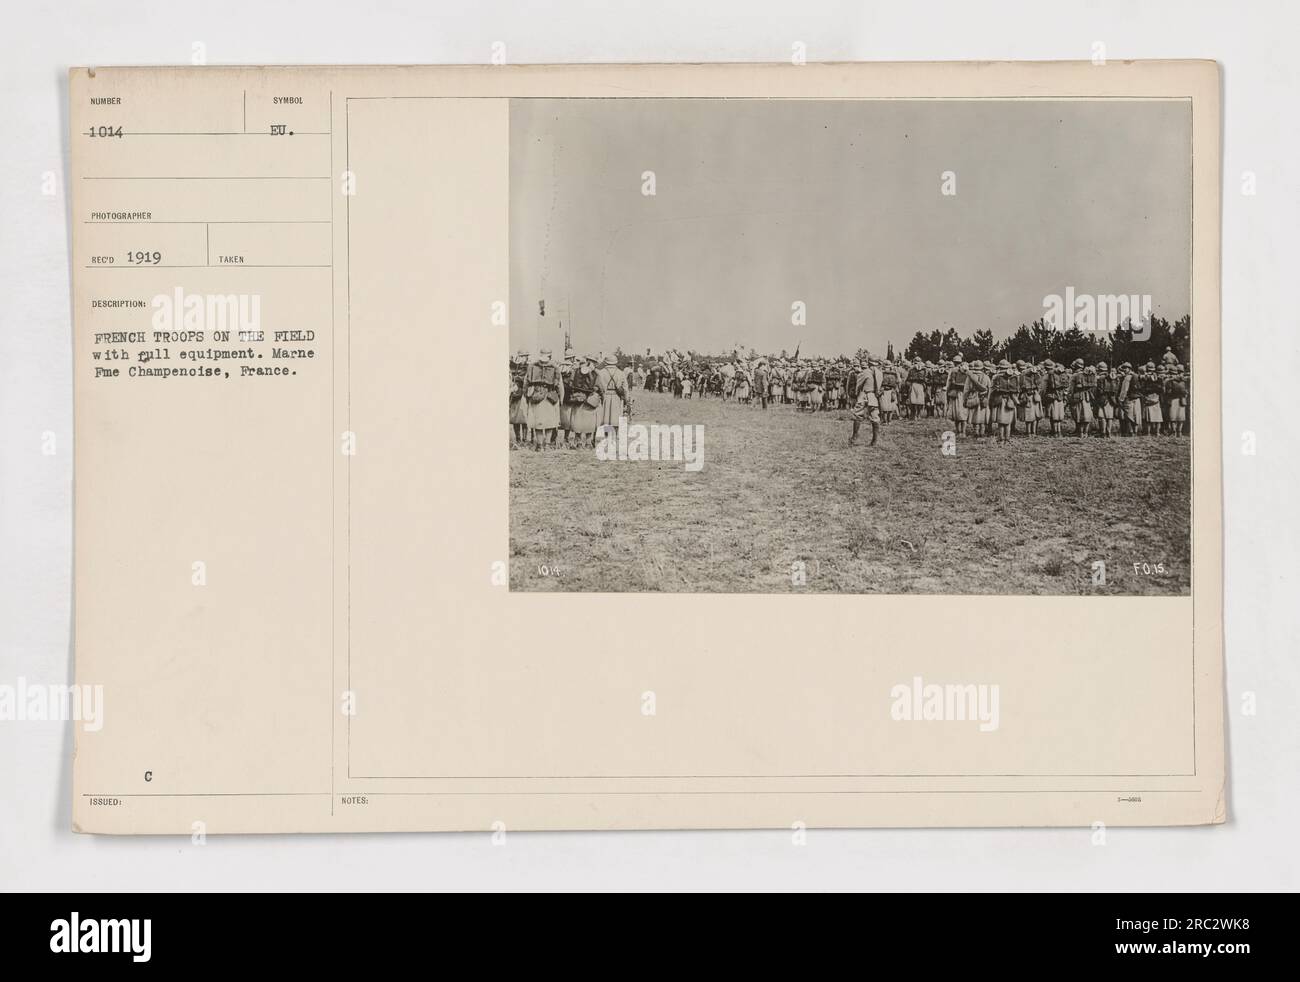 French troops seen on the field in Marne Fère-Champenoise, France. The photograph was taken in 1919 and is part of the collection 'Photographs of American Military Activities during World War One.' The image captures the troops with their equipment. Taken by an unidentified photographer, it is issued with the code number 111-SC-1014. Stock Photo